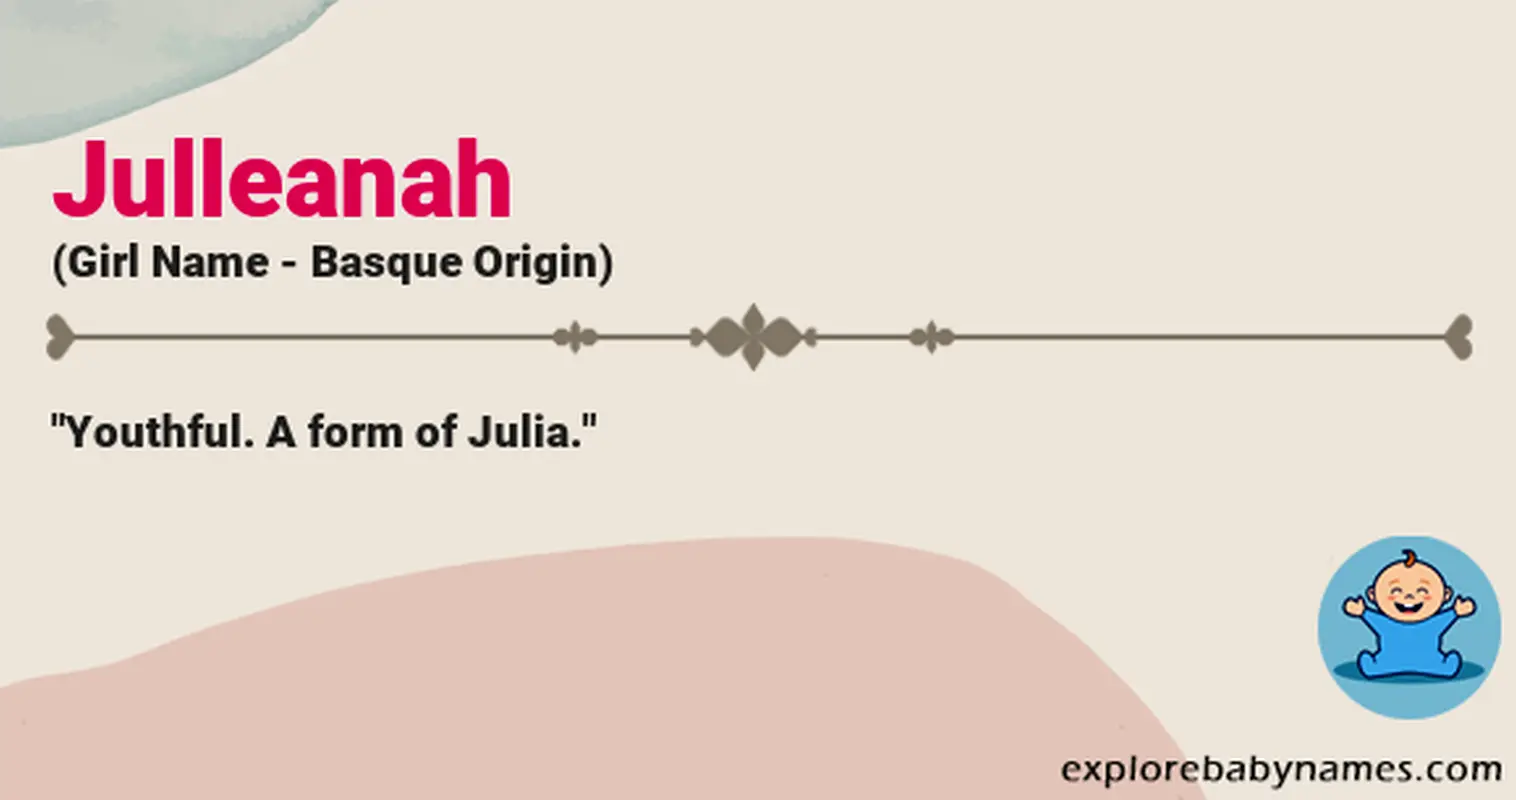 Meaning of Julleanah